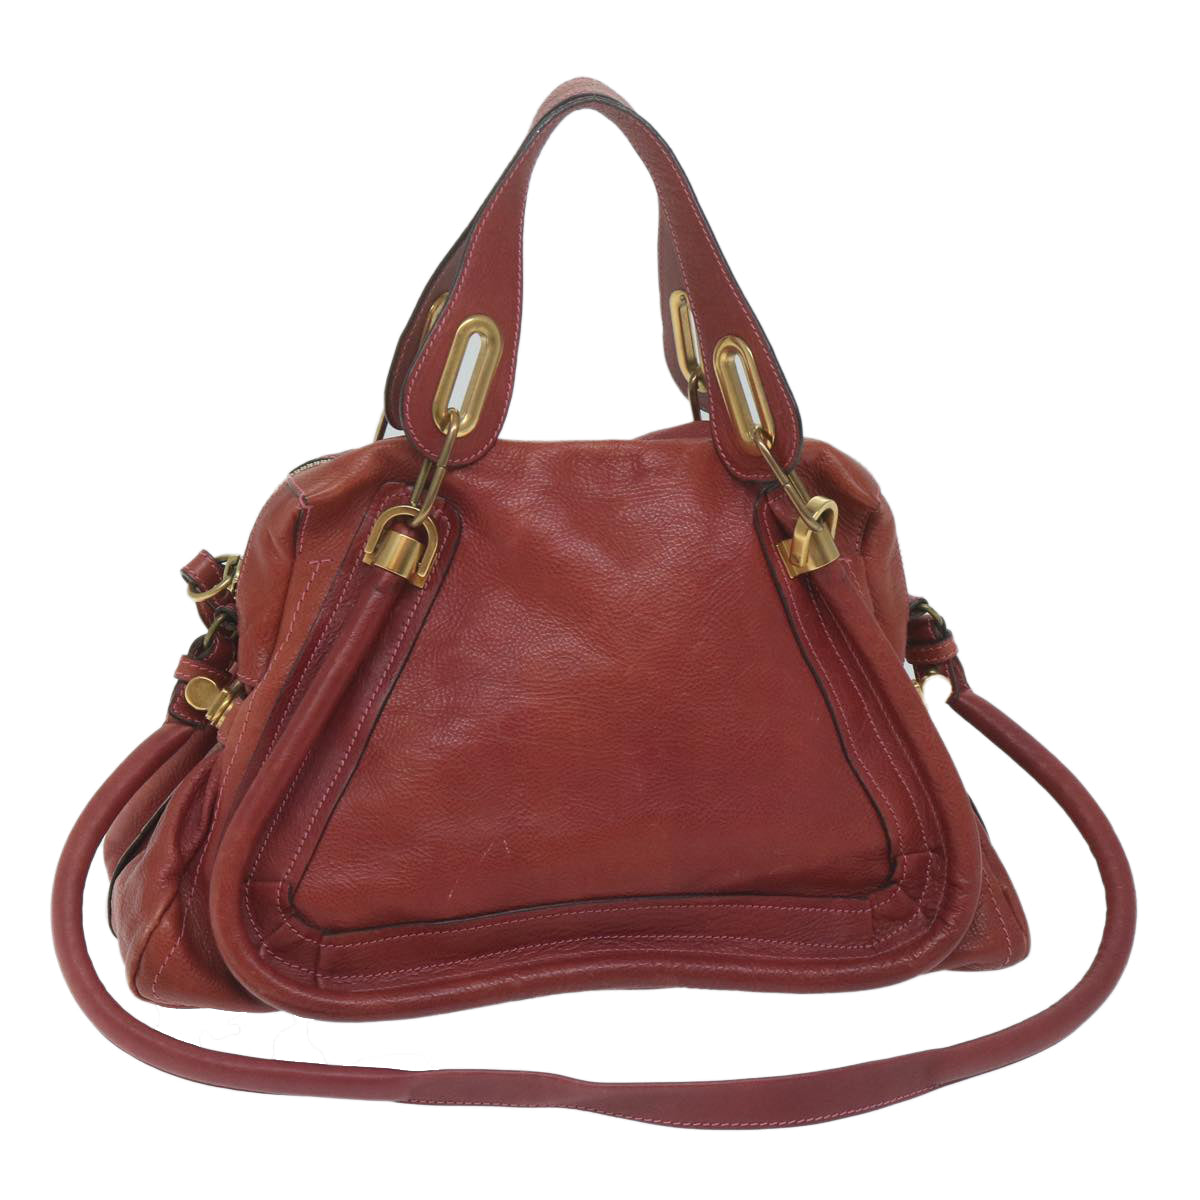 Chloe Paraty Hand Bag Leather Red Auth am5508